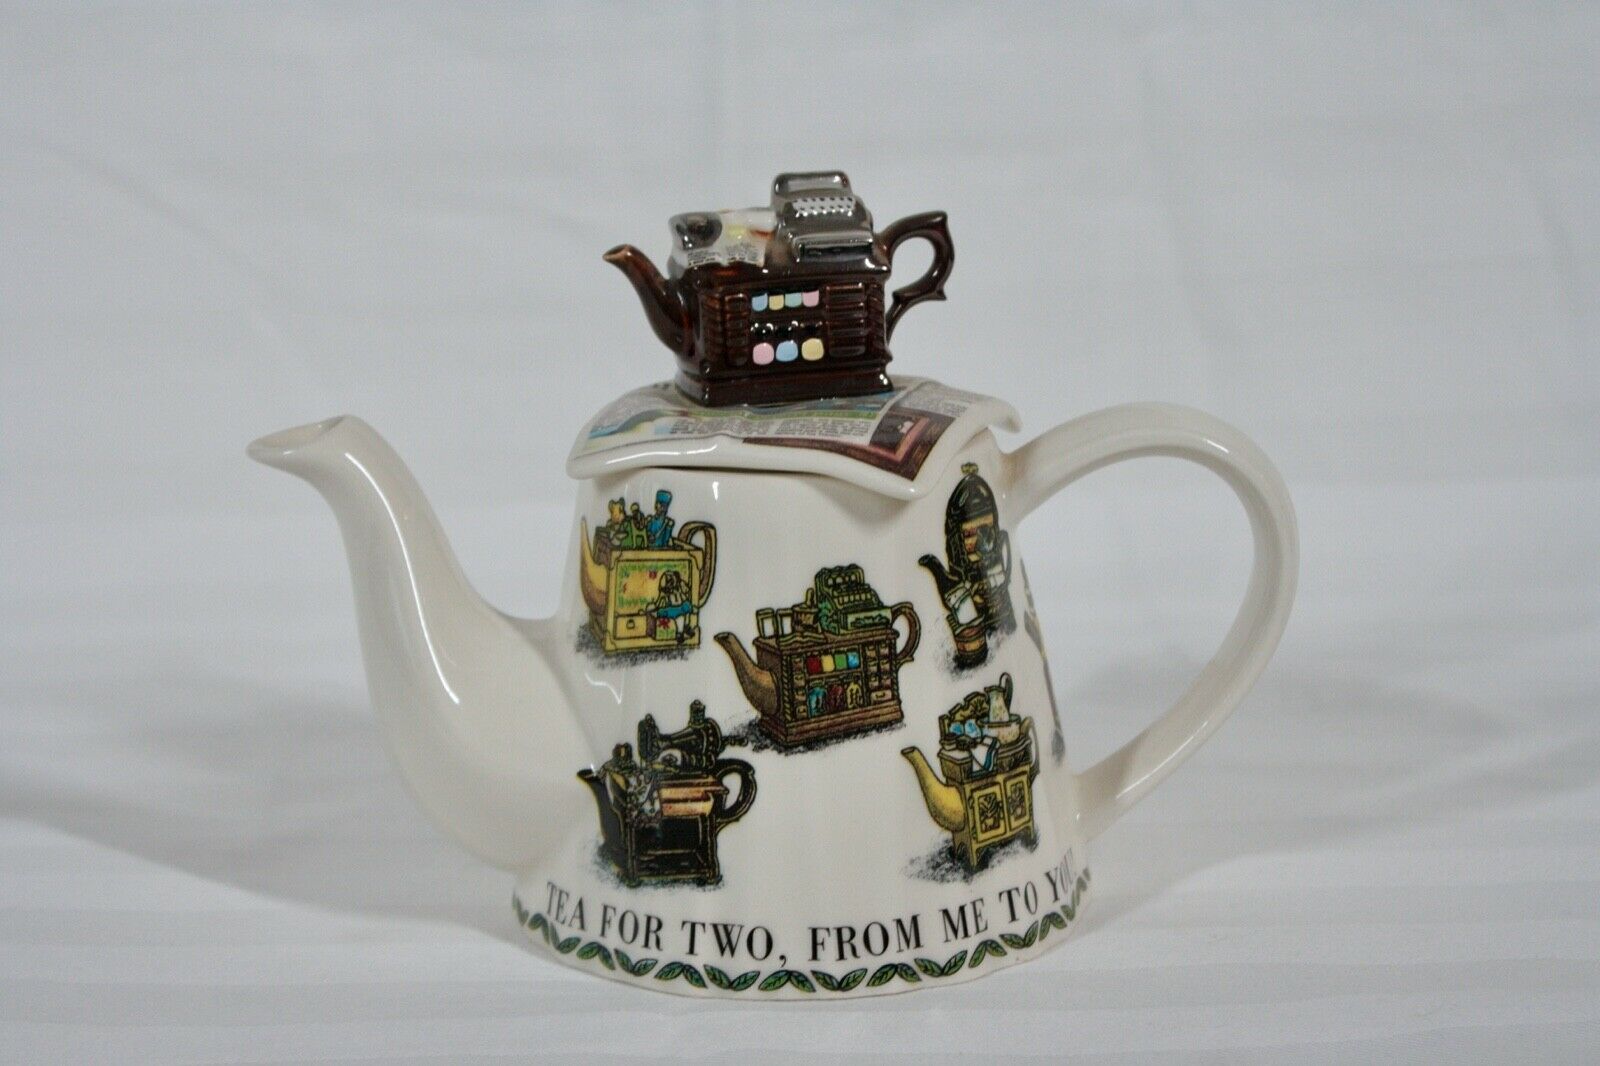 Rare! Cardew Collectors Club Tea For Two From Me To You 1997 To 1998 Teapot